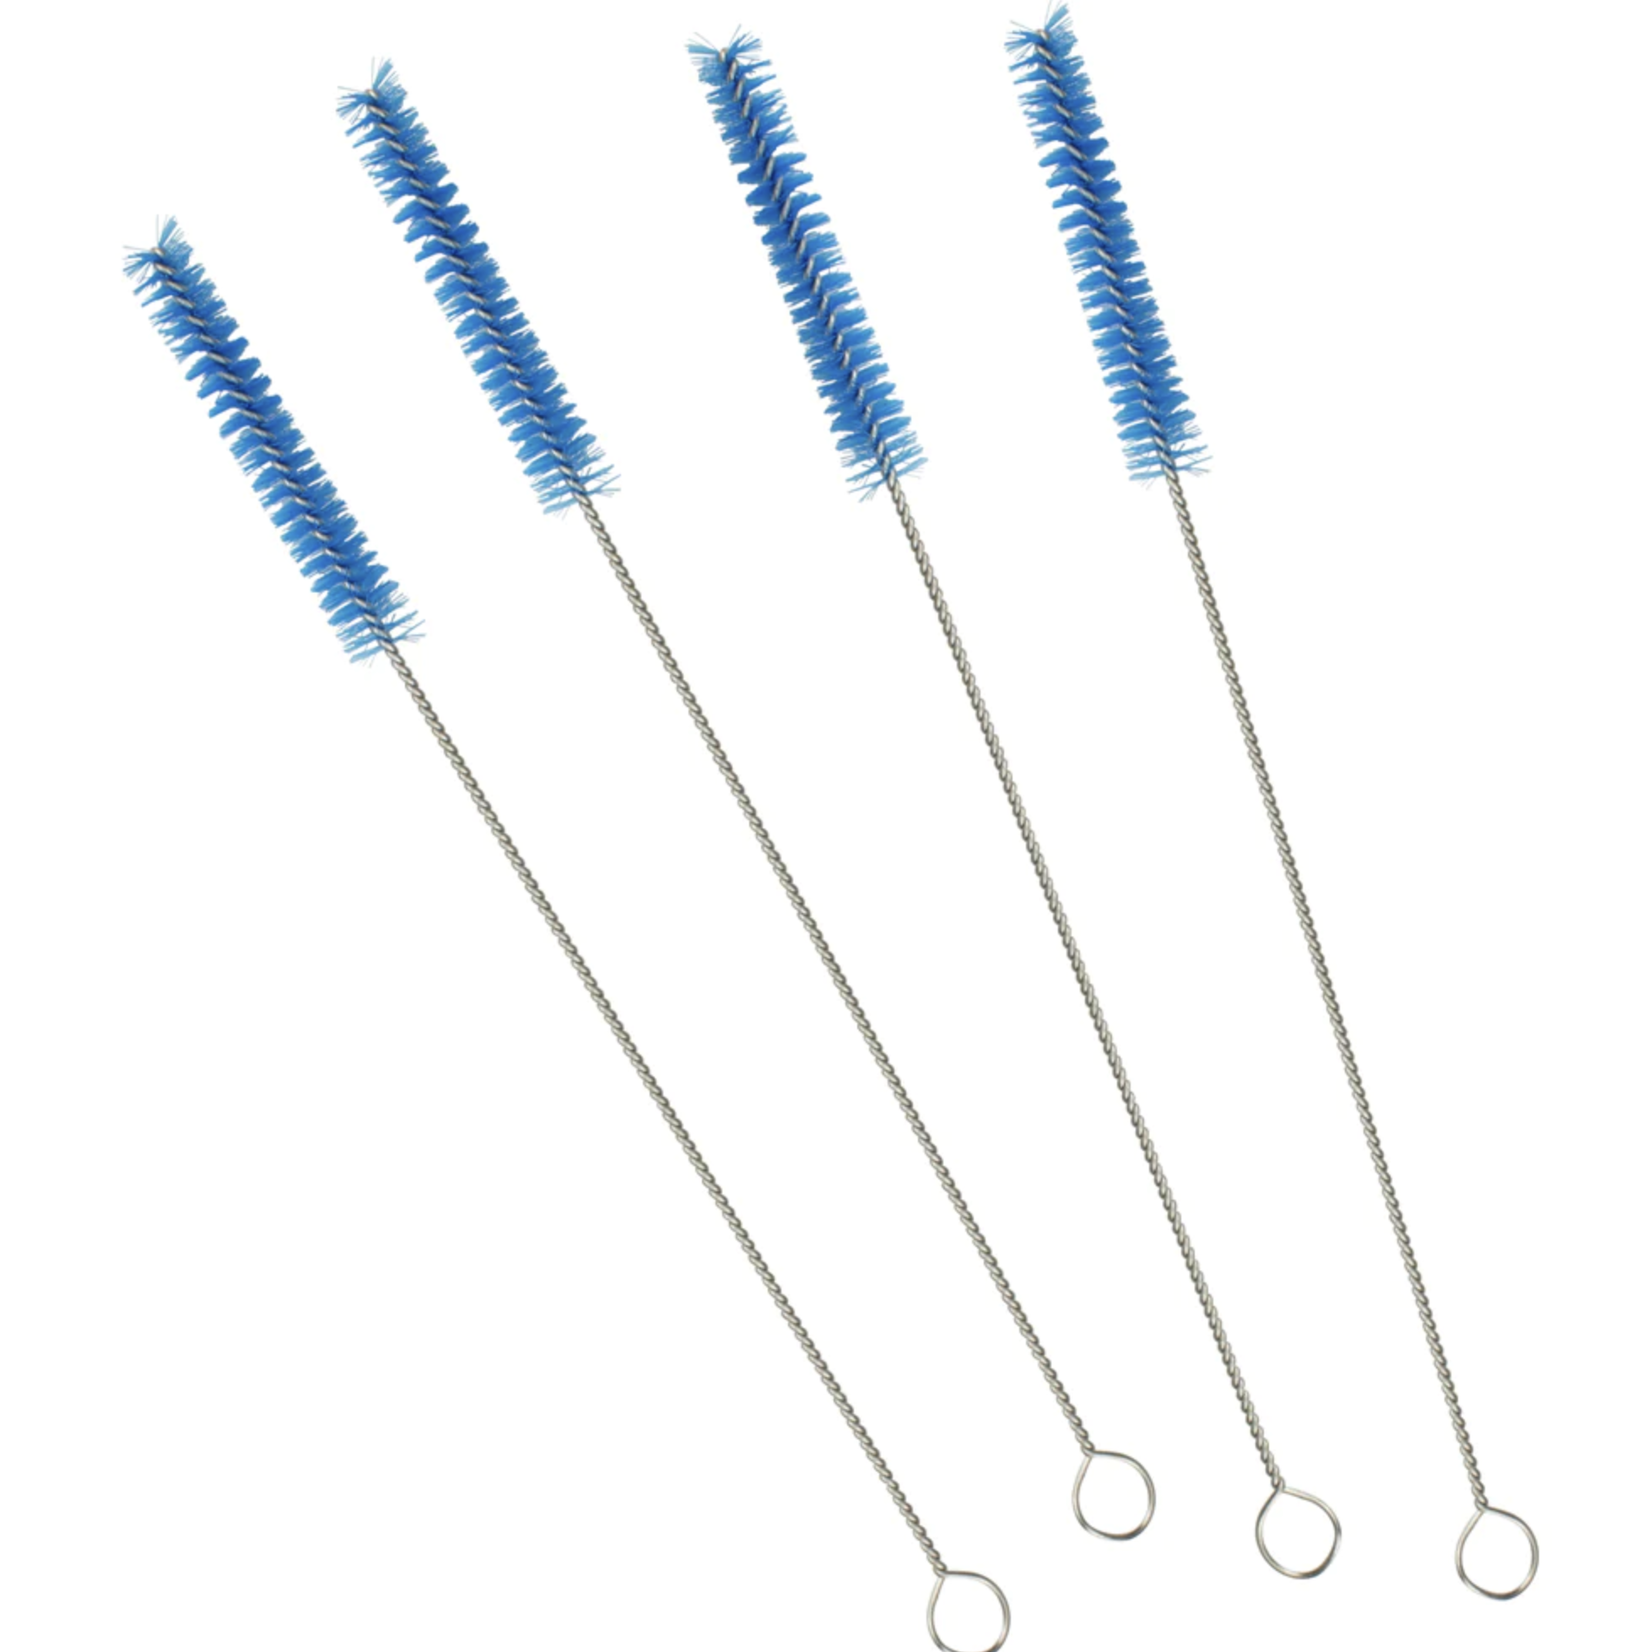 Dr Brown's Vent Cleaning Brushes